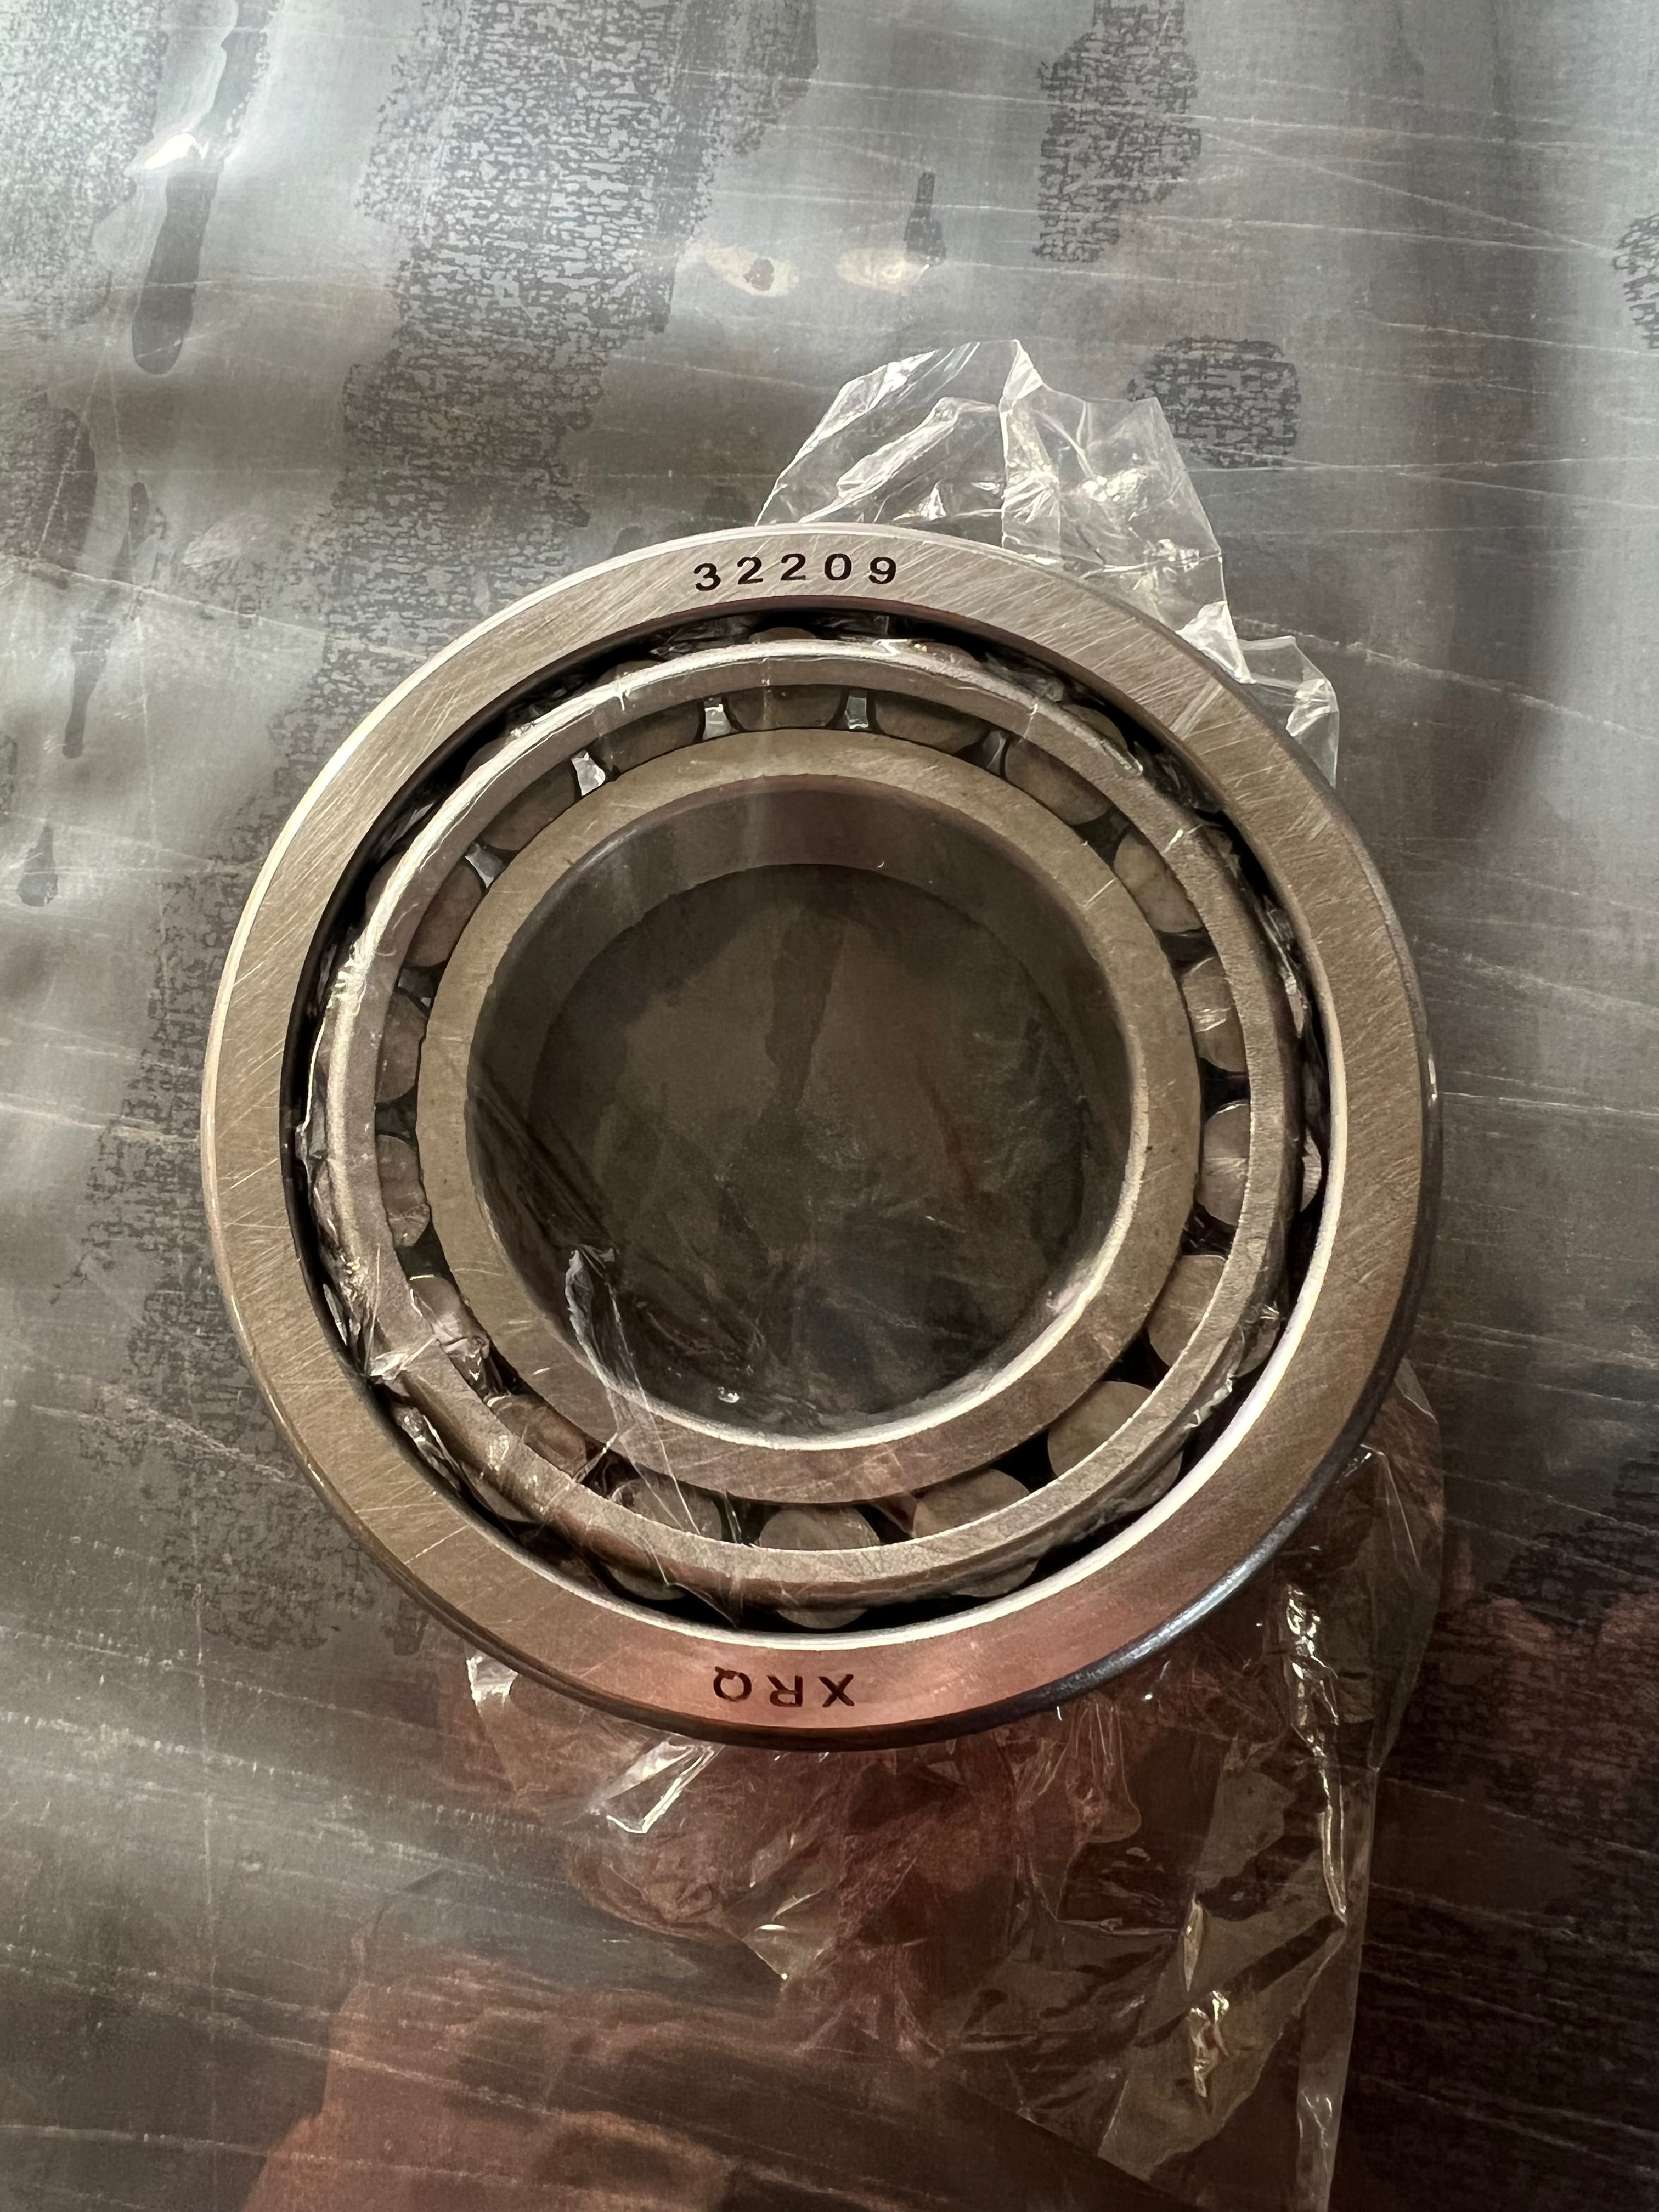 The Importance of Using Quality Bearings